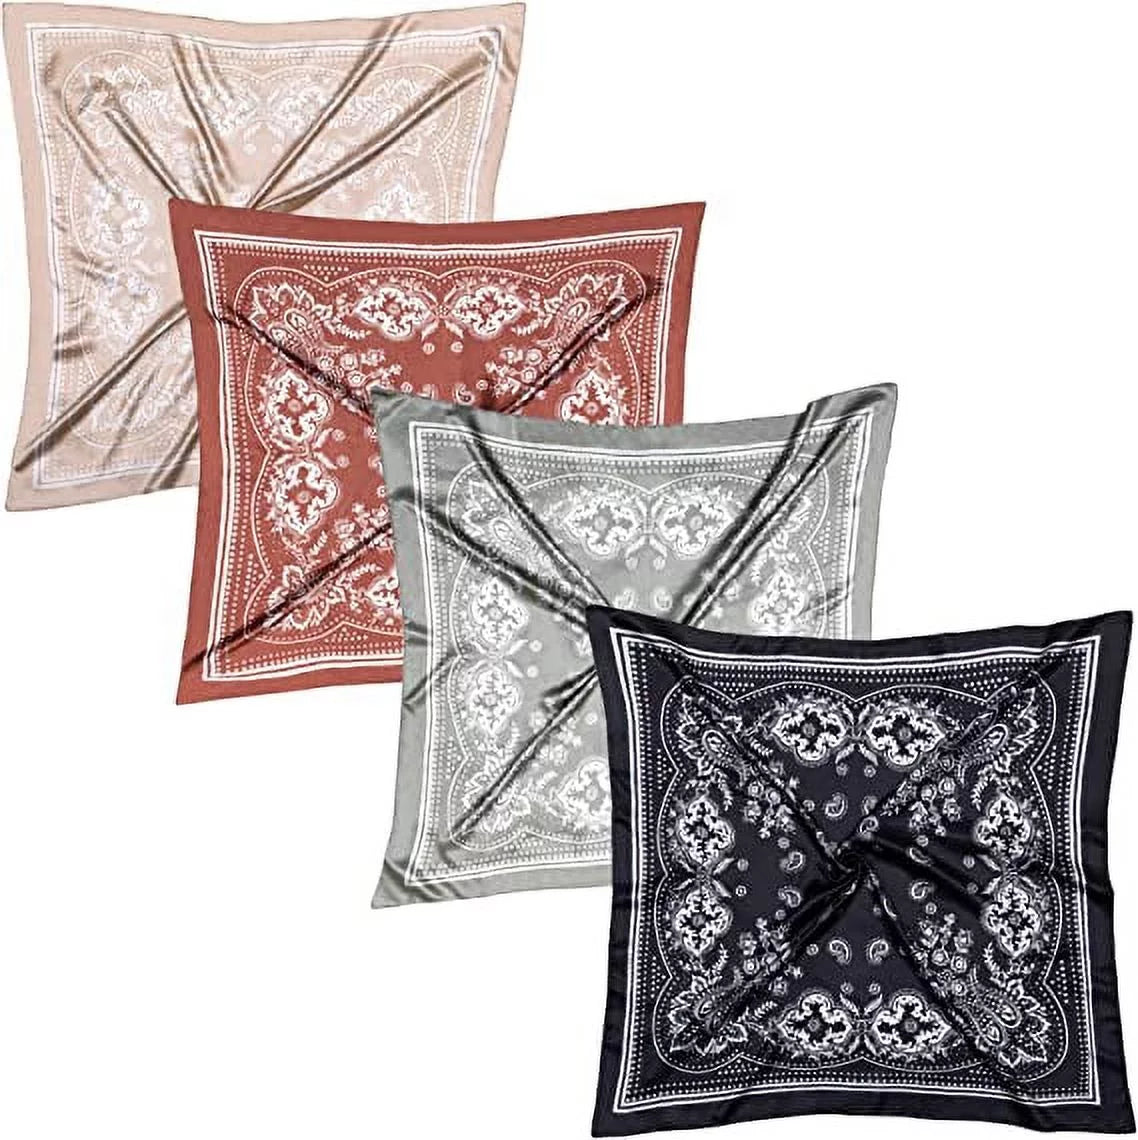 35'' Satin Head Scarf for Women, 4PCS Large Square Hair Scarf Silk Bandana Scarf for Hair Wrapping at Night